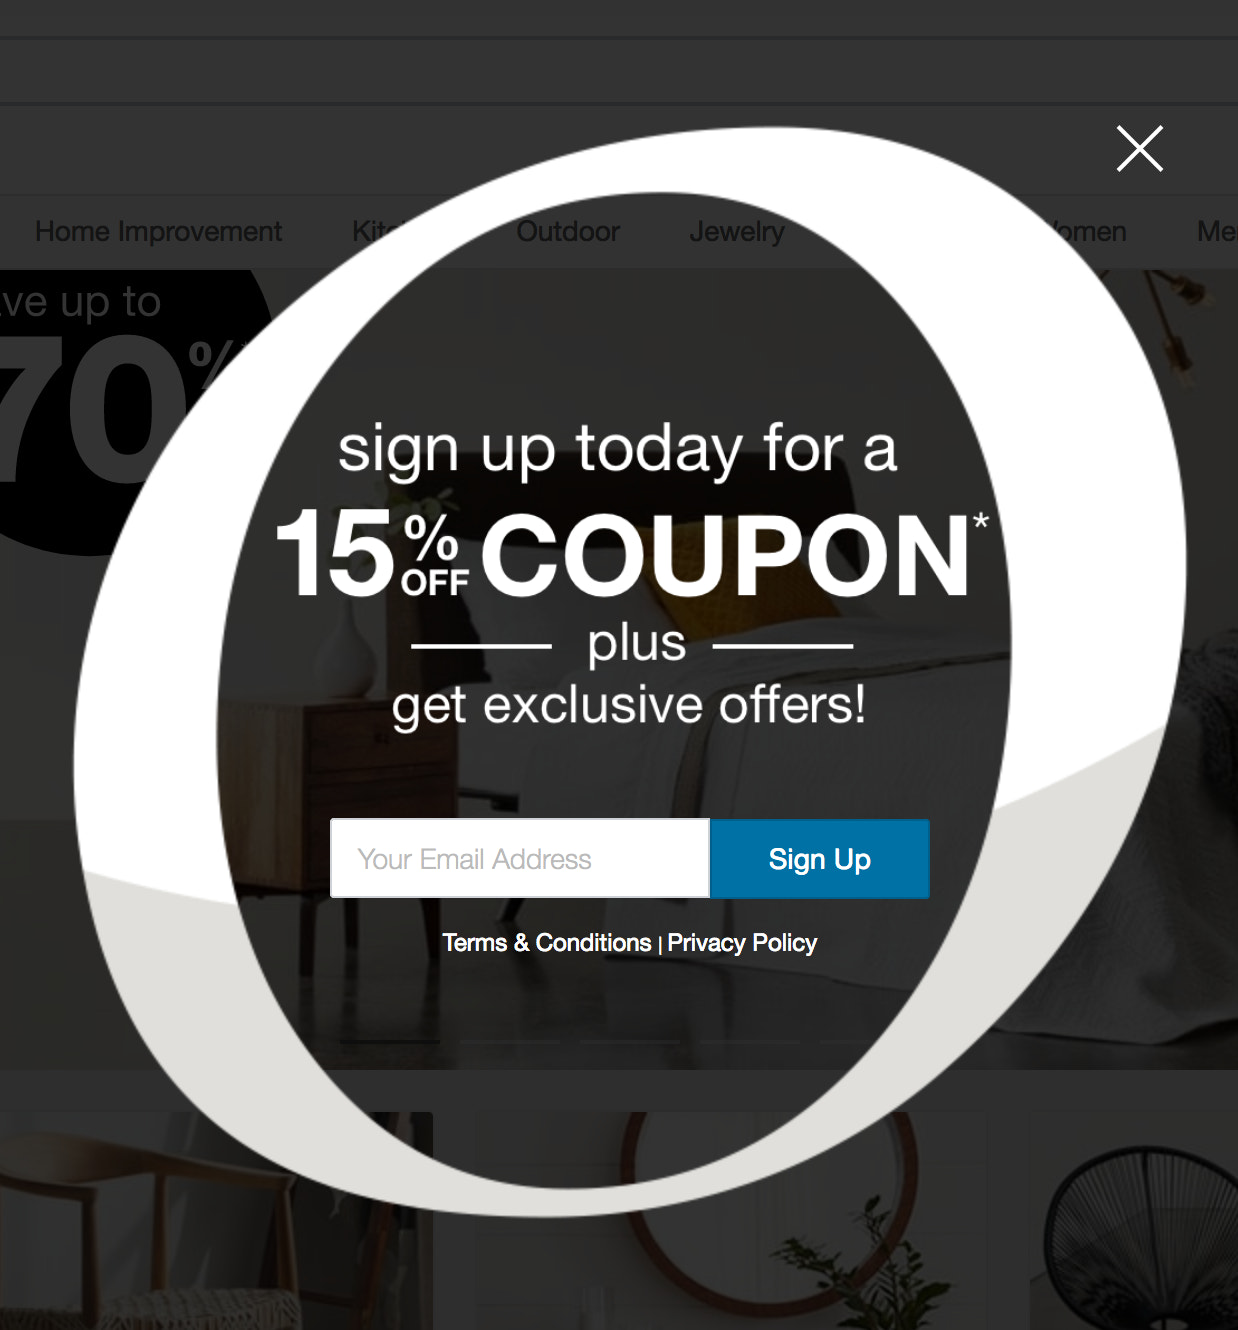 Discounts Coupons 19 Ways To Use Deals To Drive Revenue Images, Photos, Reviews